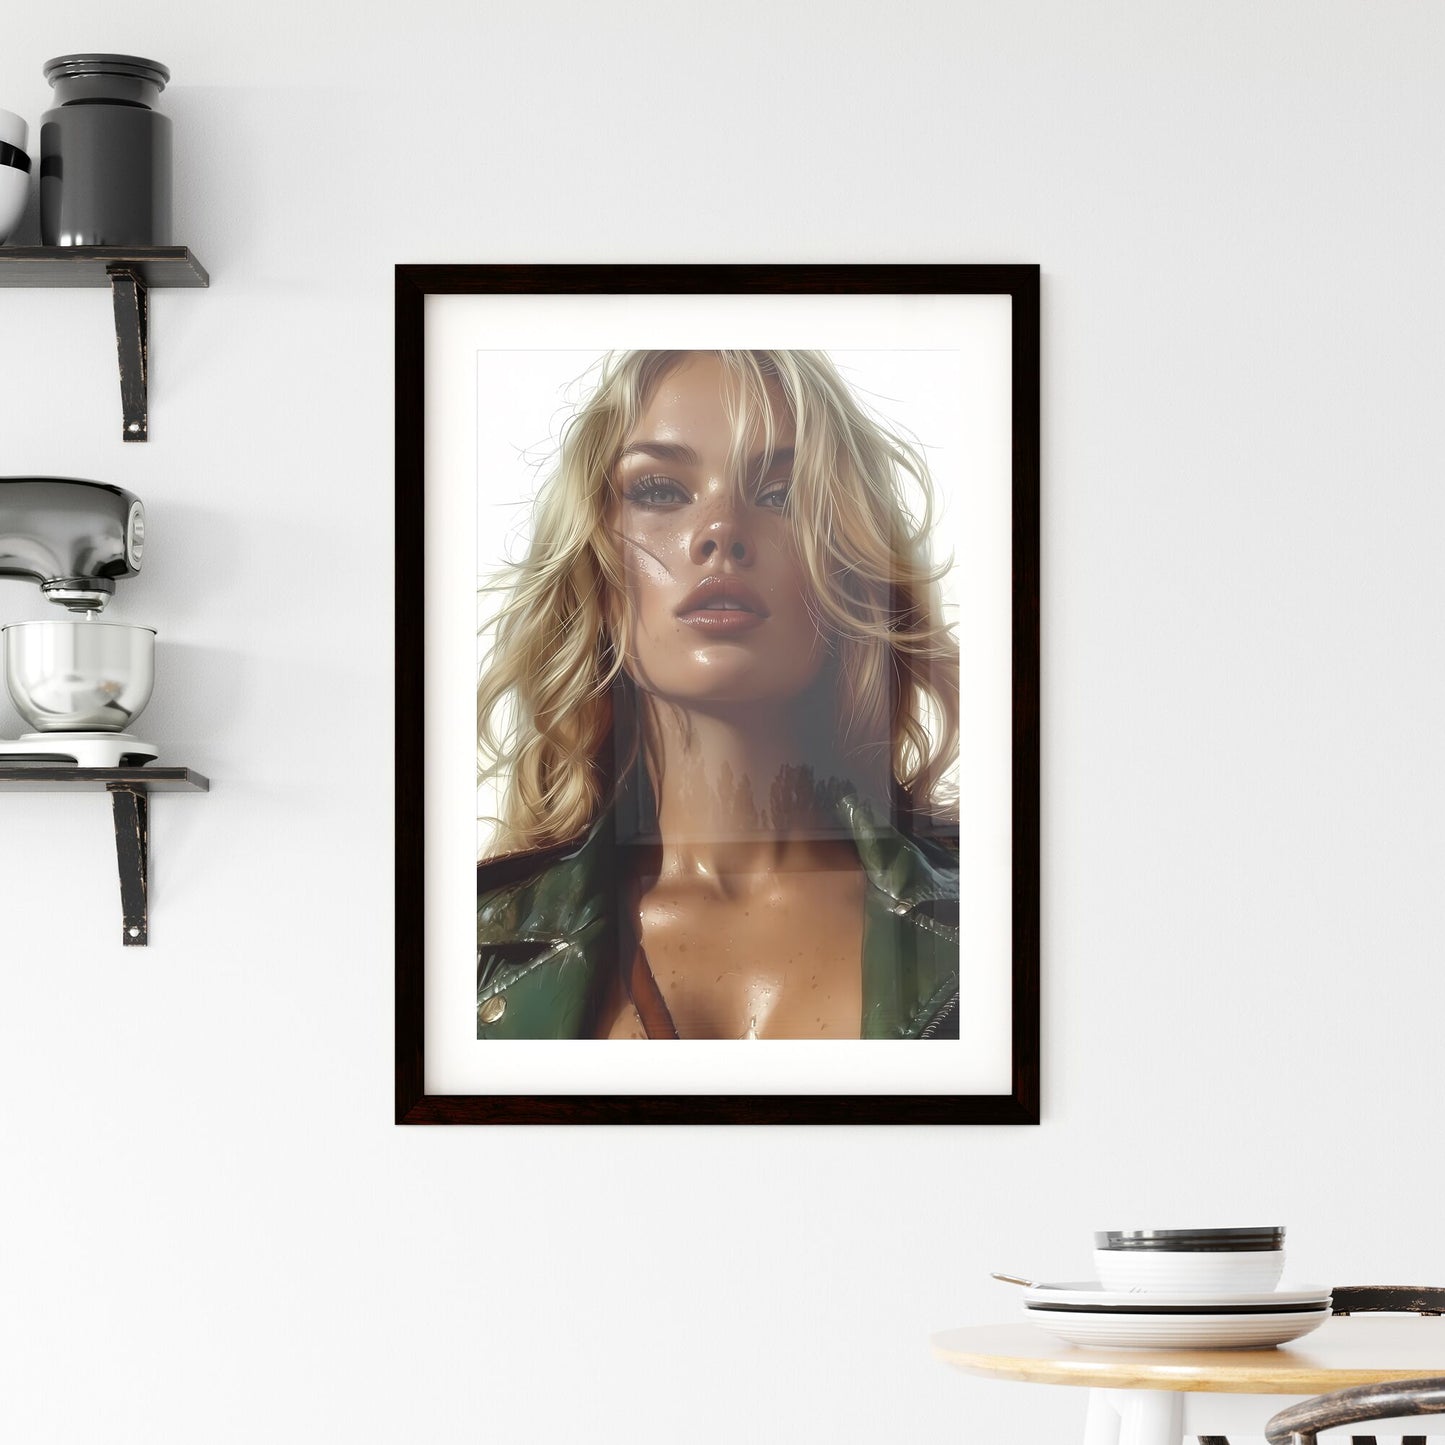 Sitting pin up factory worker girl - Art print of a woman with long blonde hair and freckles Default Title